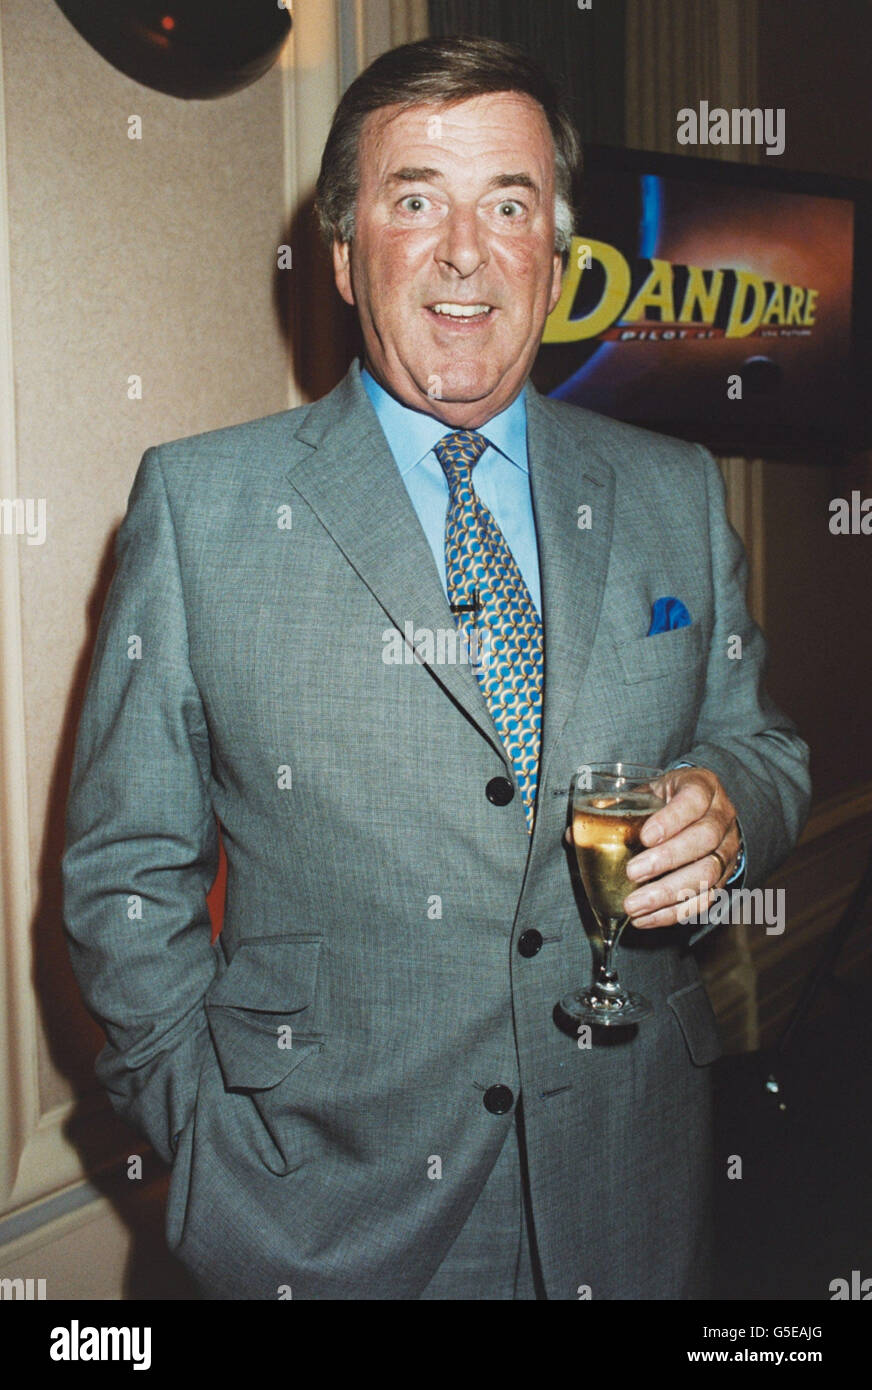 Broadcaster Terry Wogan attending the launch of the new animated television series based on the fifties comic hero Dan Dare at the RAF Club, London. Stock Photo